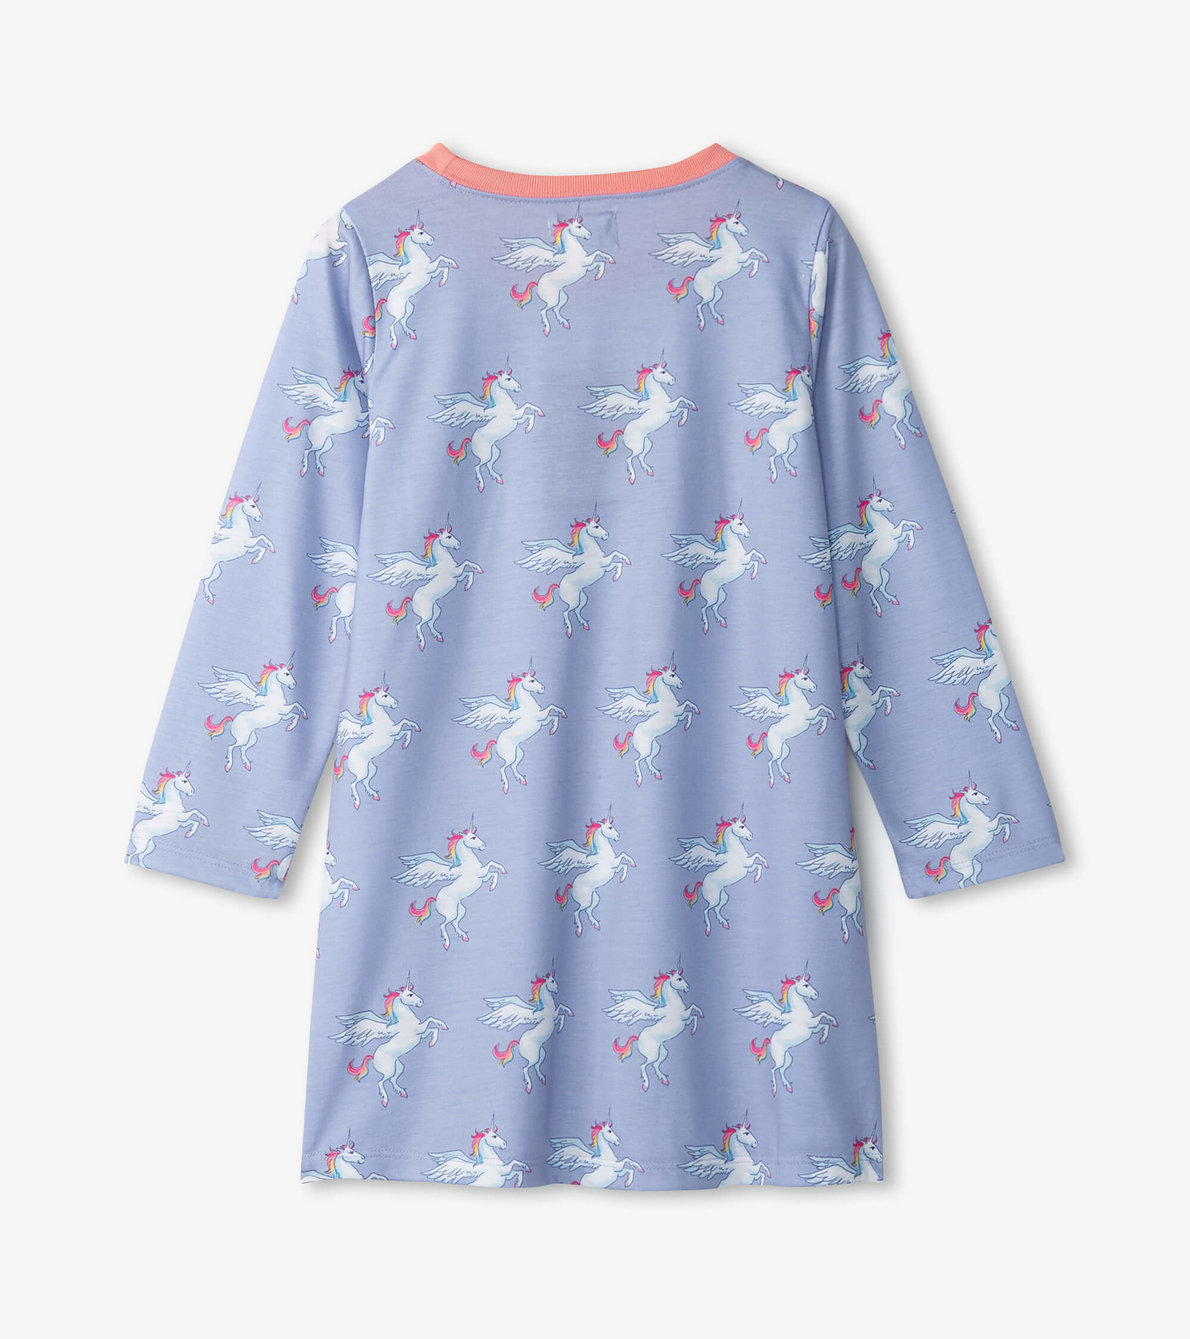 View larger image of Girls Rainbow Unicorn Long Sleeve Nightgown